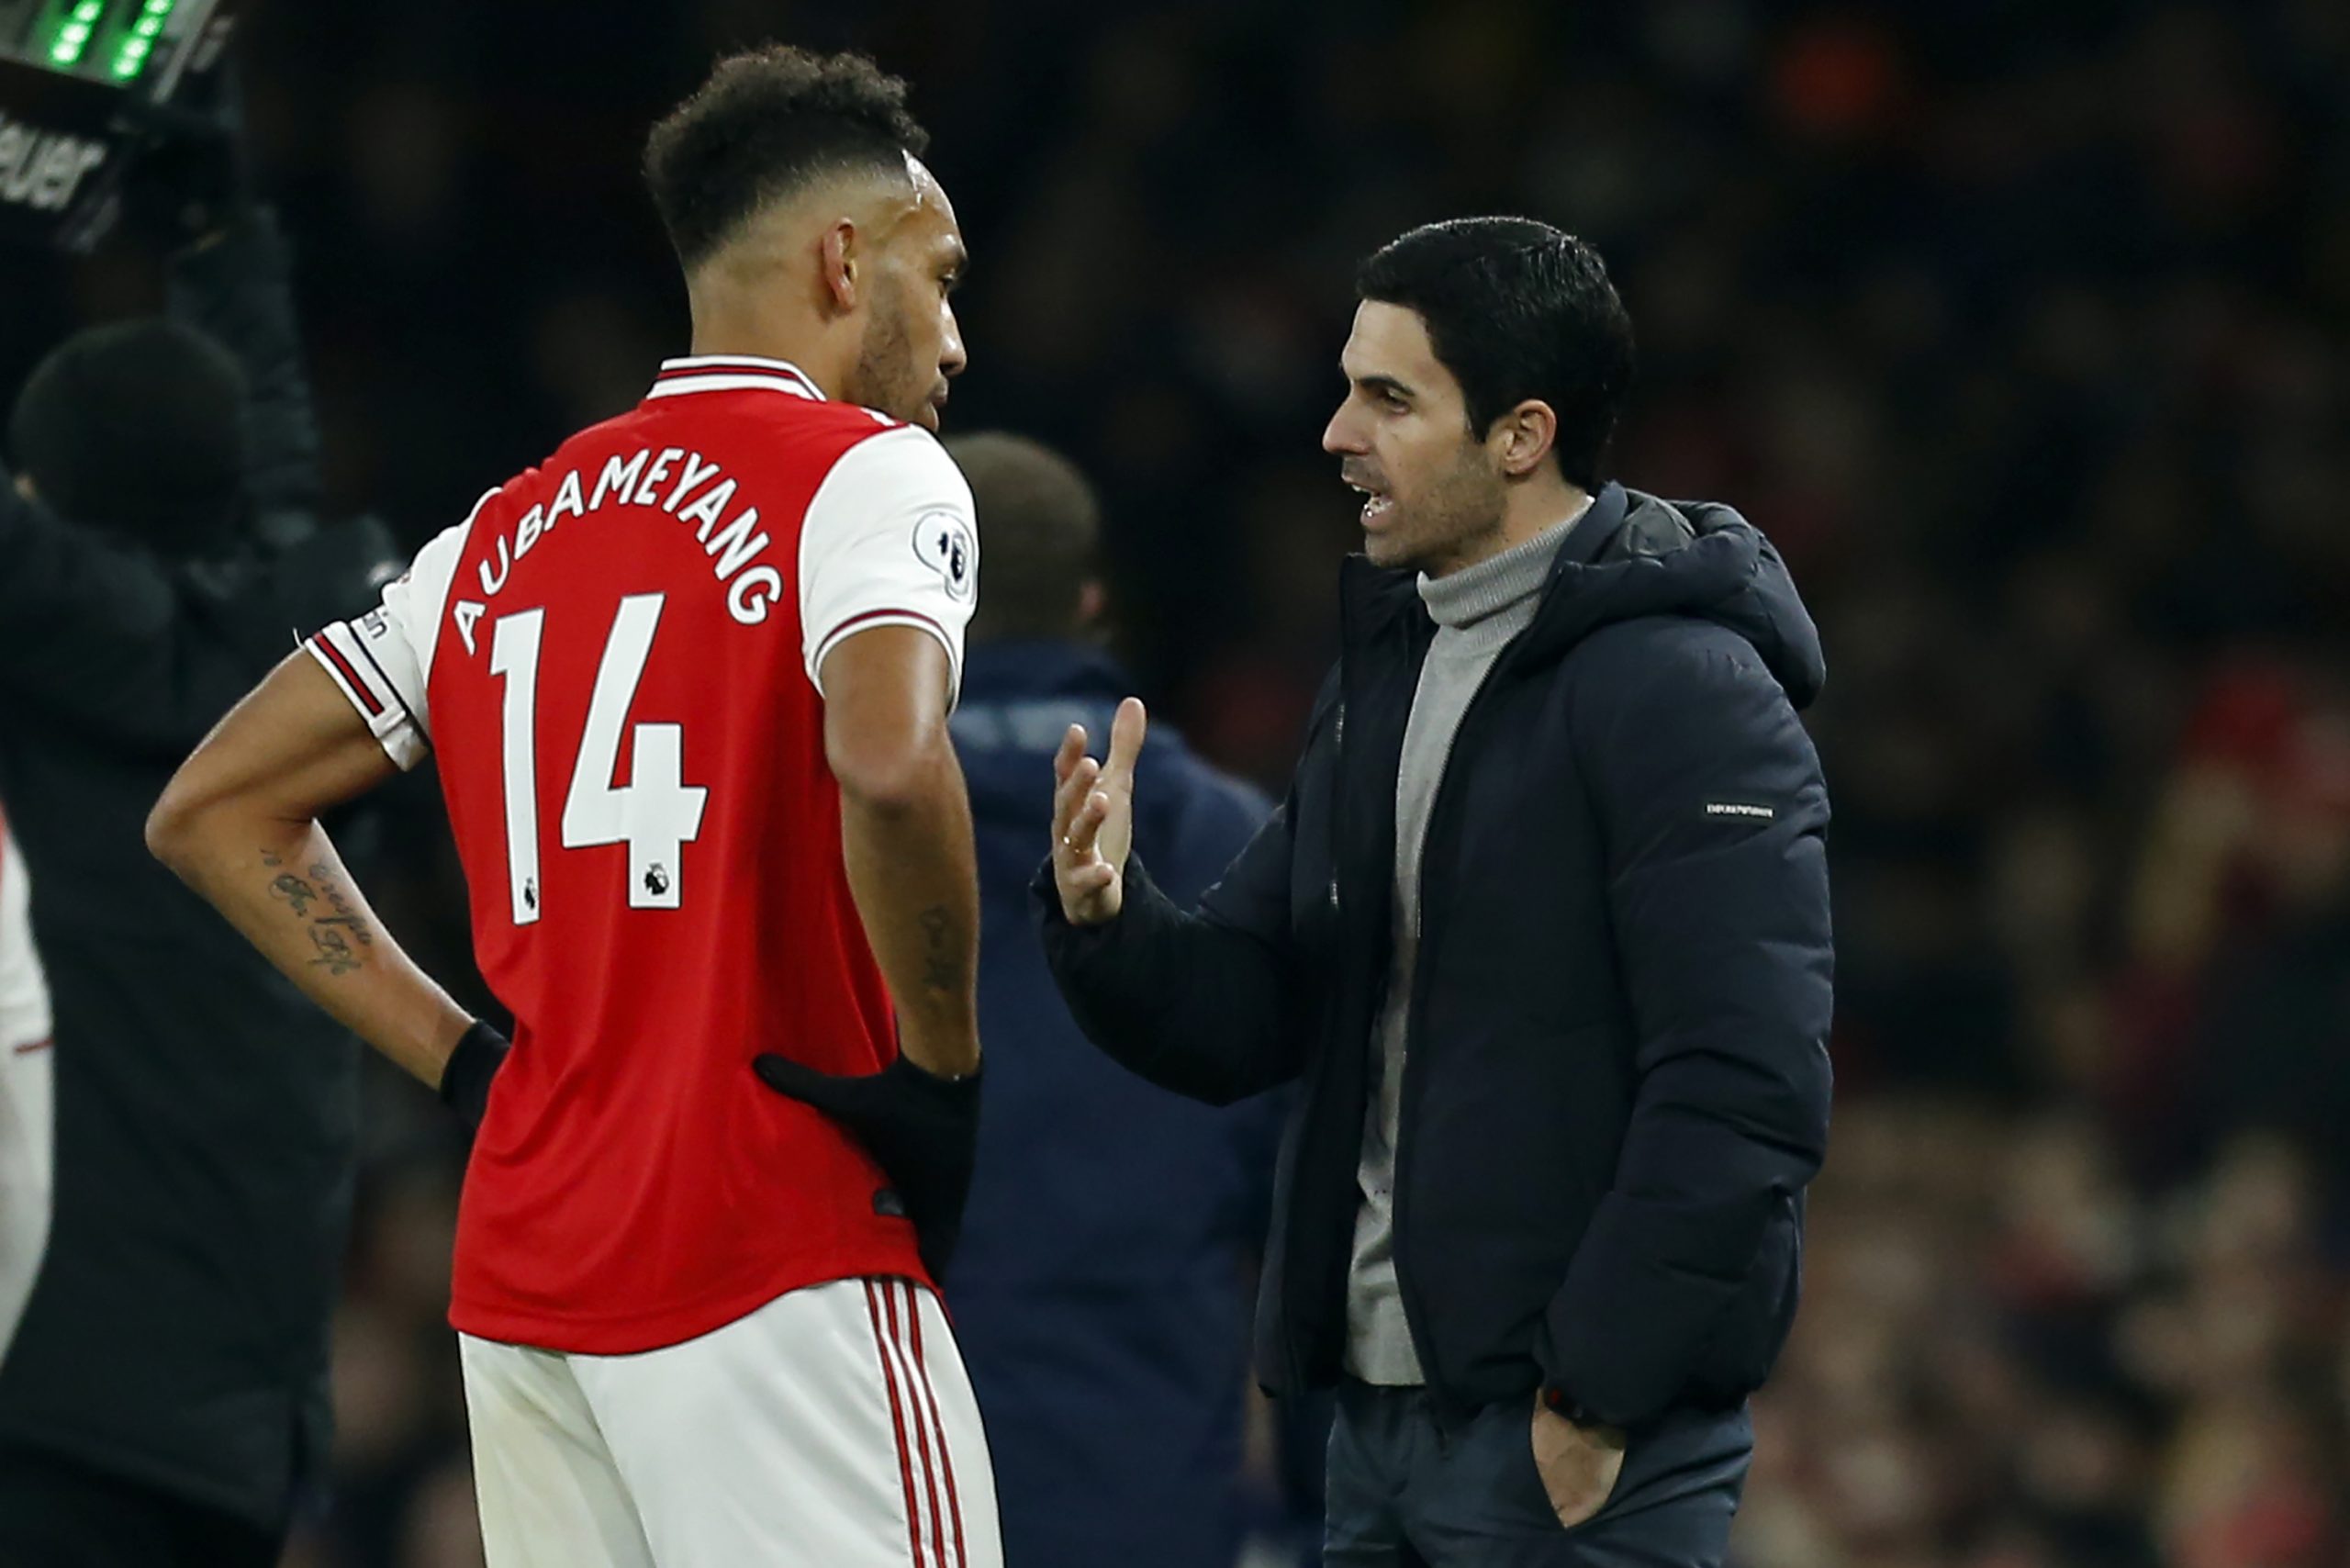 Aubameyang dropped from derby win for “disciplinary issues”, Arteta